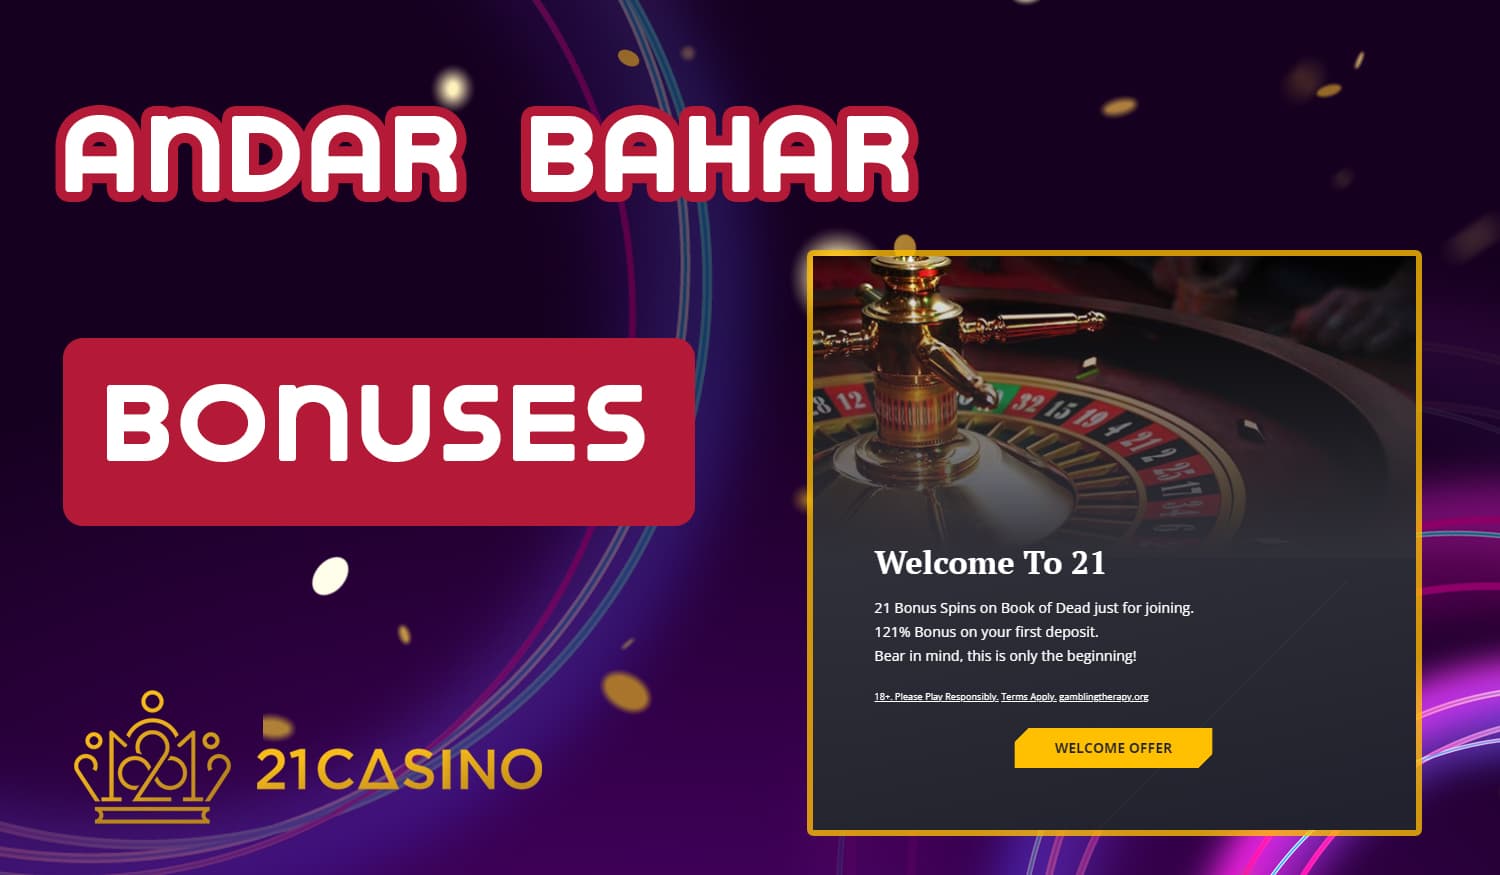 Promotions and bonuses available for Andar Bahar fans at 21 Casino site